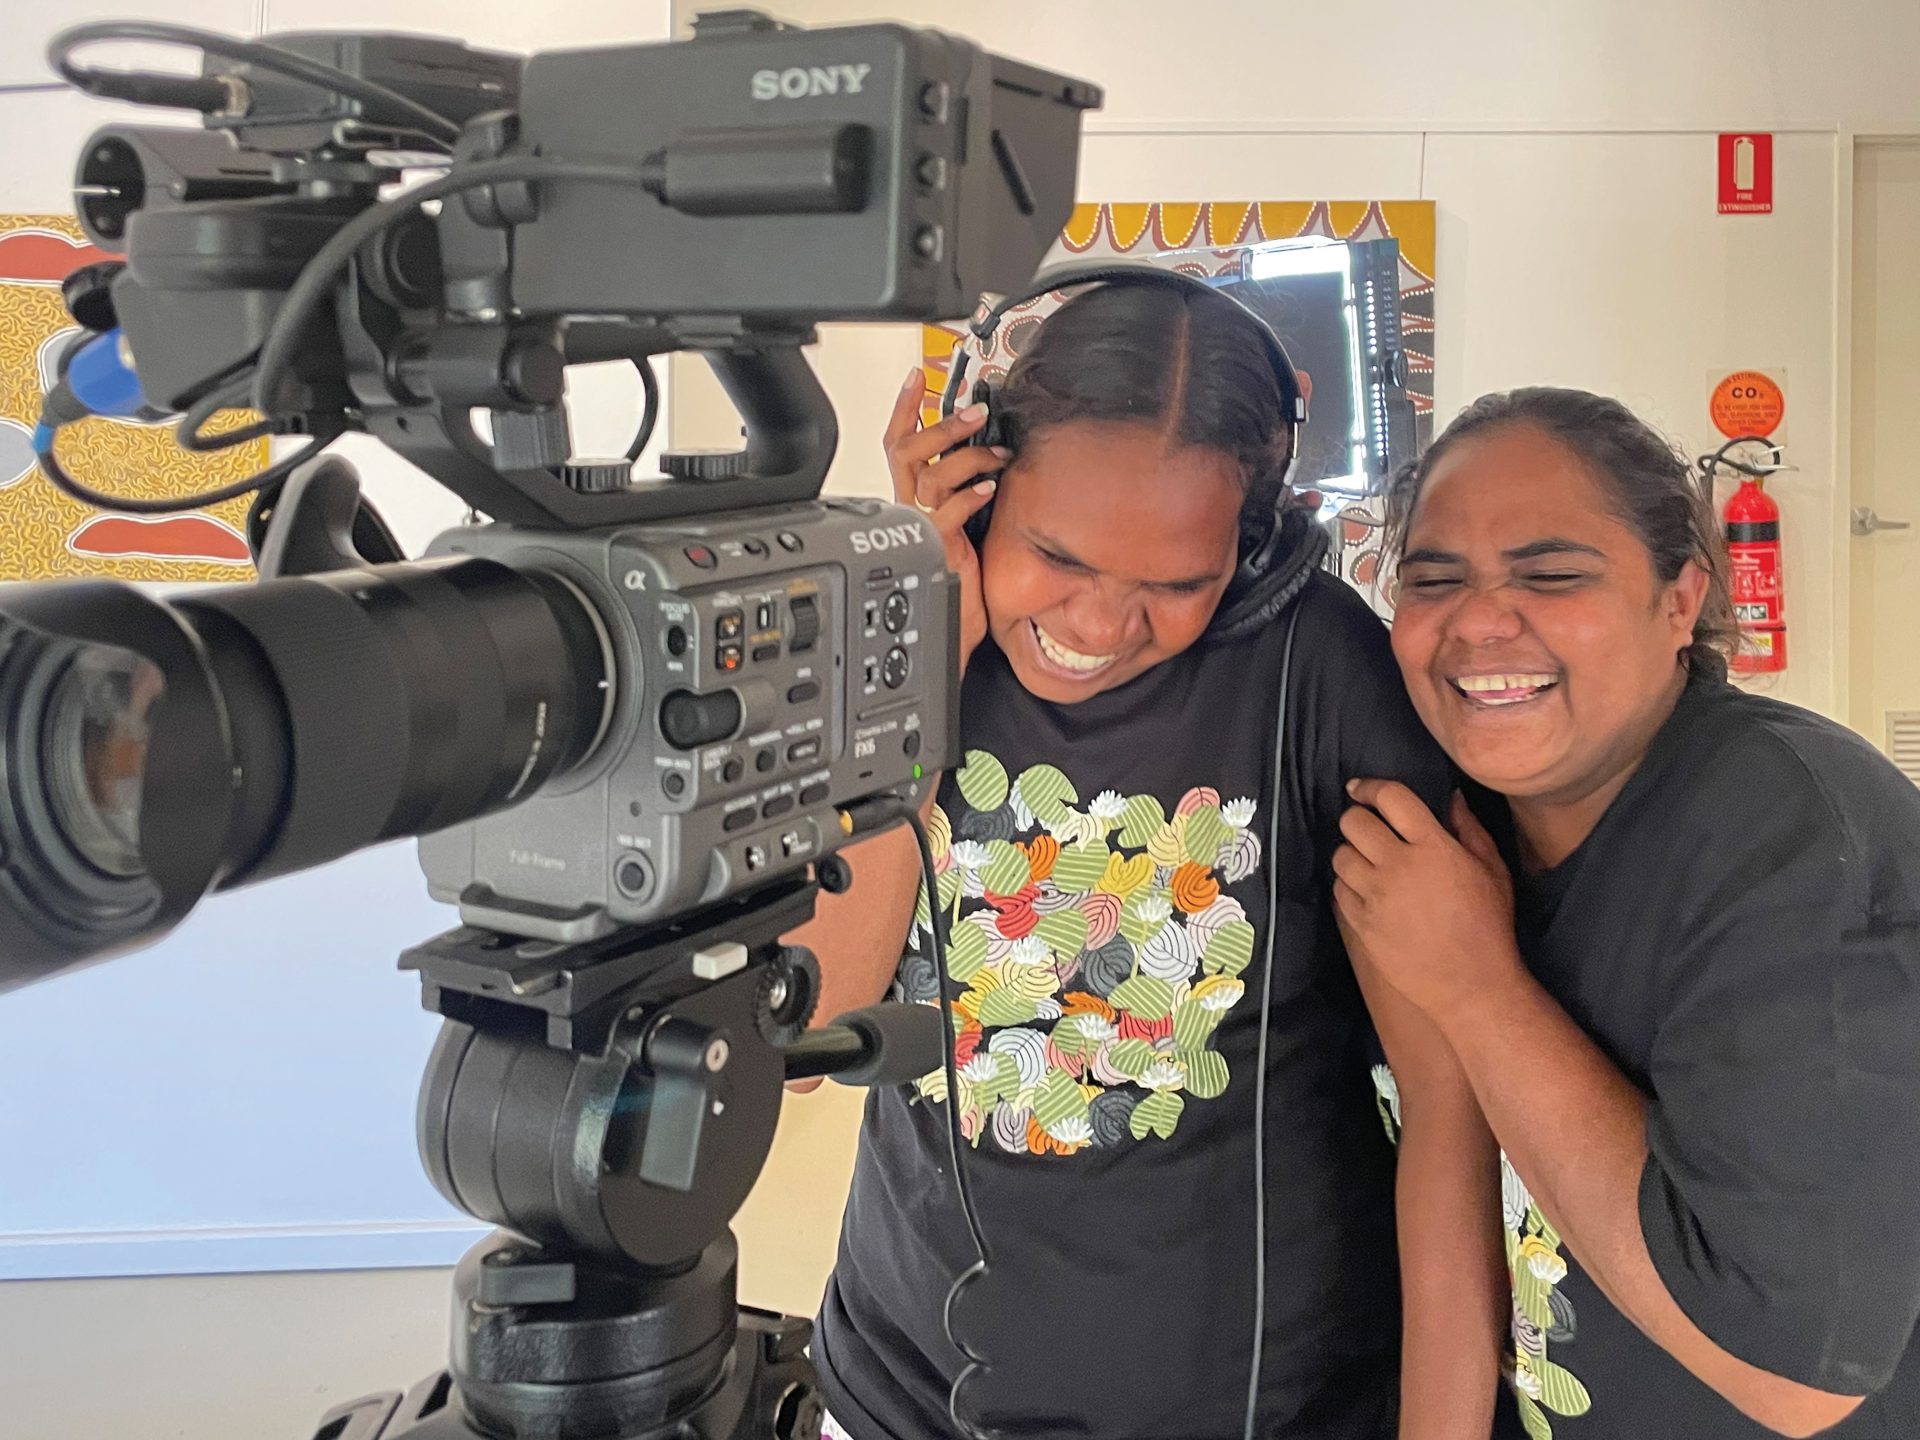 Behind the scenes for WA Museum Digital Art Project, Cathy Ward (left) and Delaney Griffiths (right), Waringarri Abo-riginal Arts, Miriwoong Country, Kununarra, WA, 2022. Im-age courtesy of Sohan Ariel Hayes & Devris Hasan.